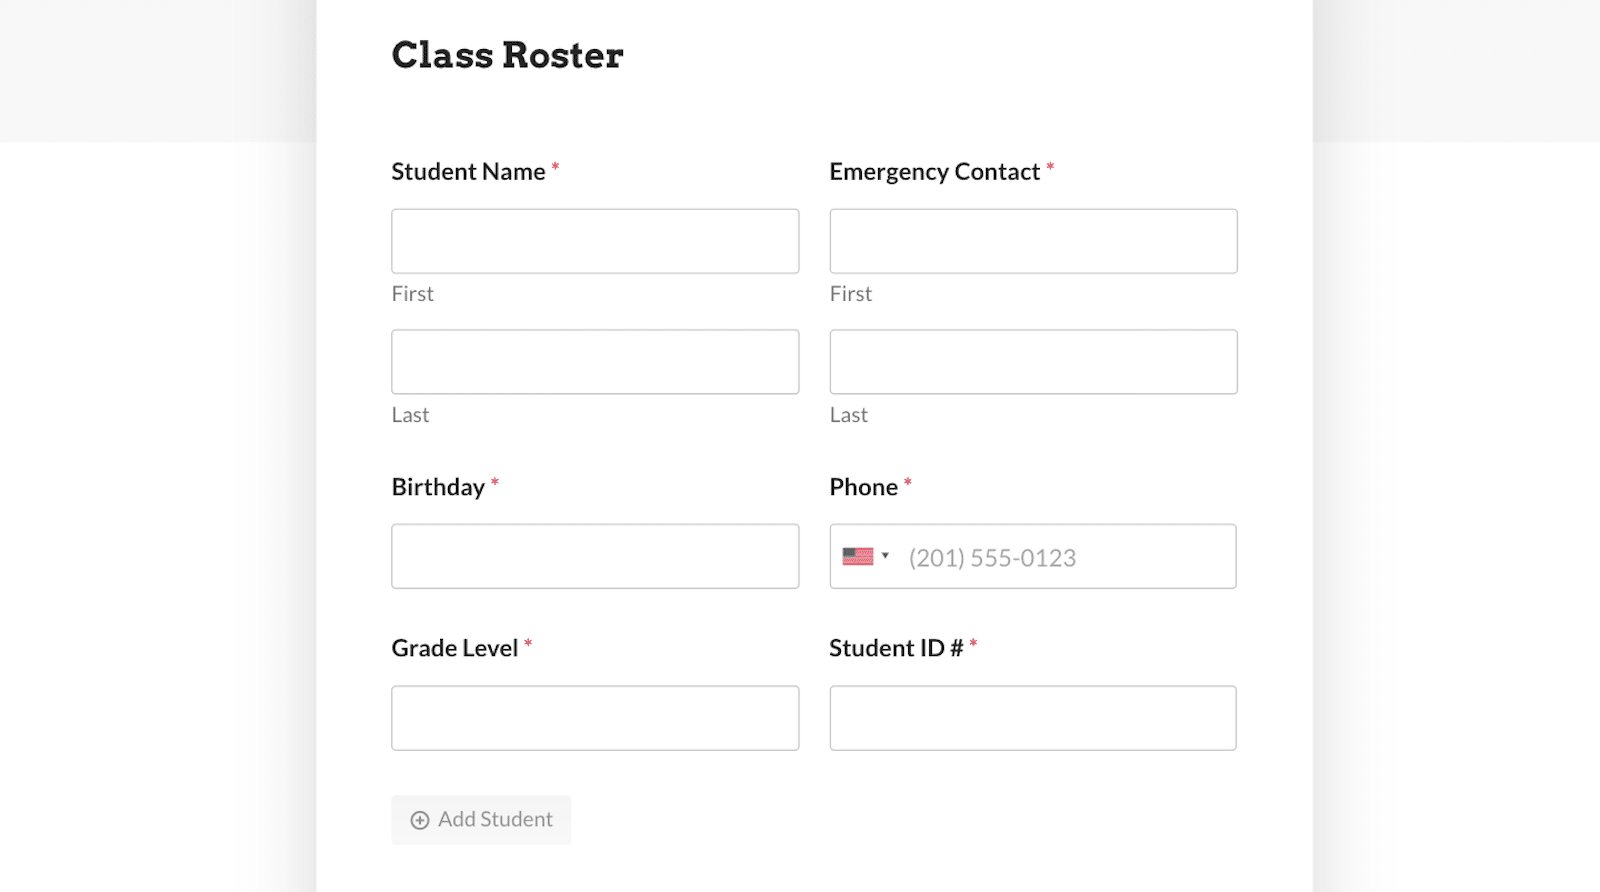 The class roster section of the form template